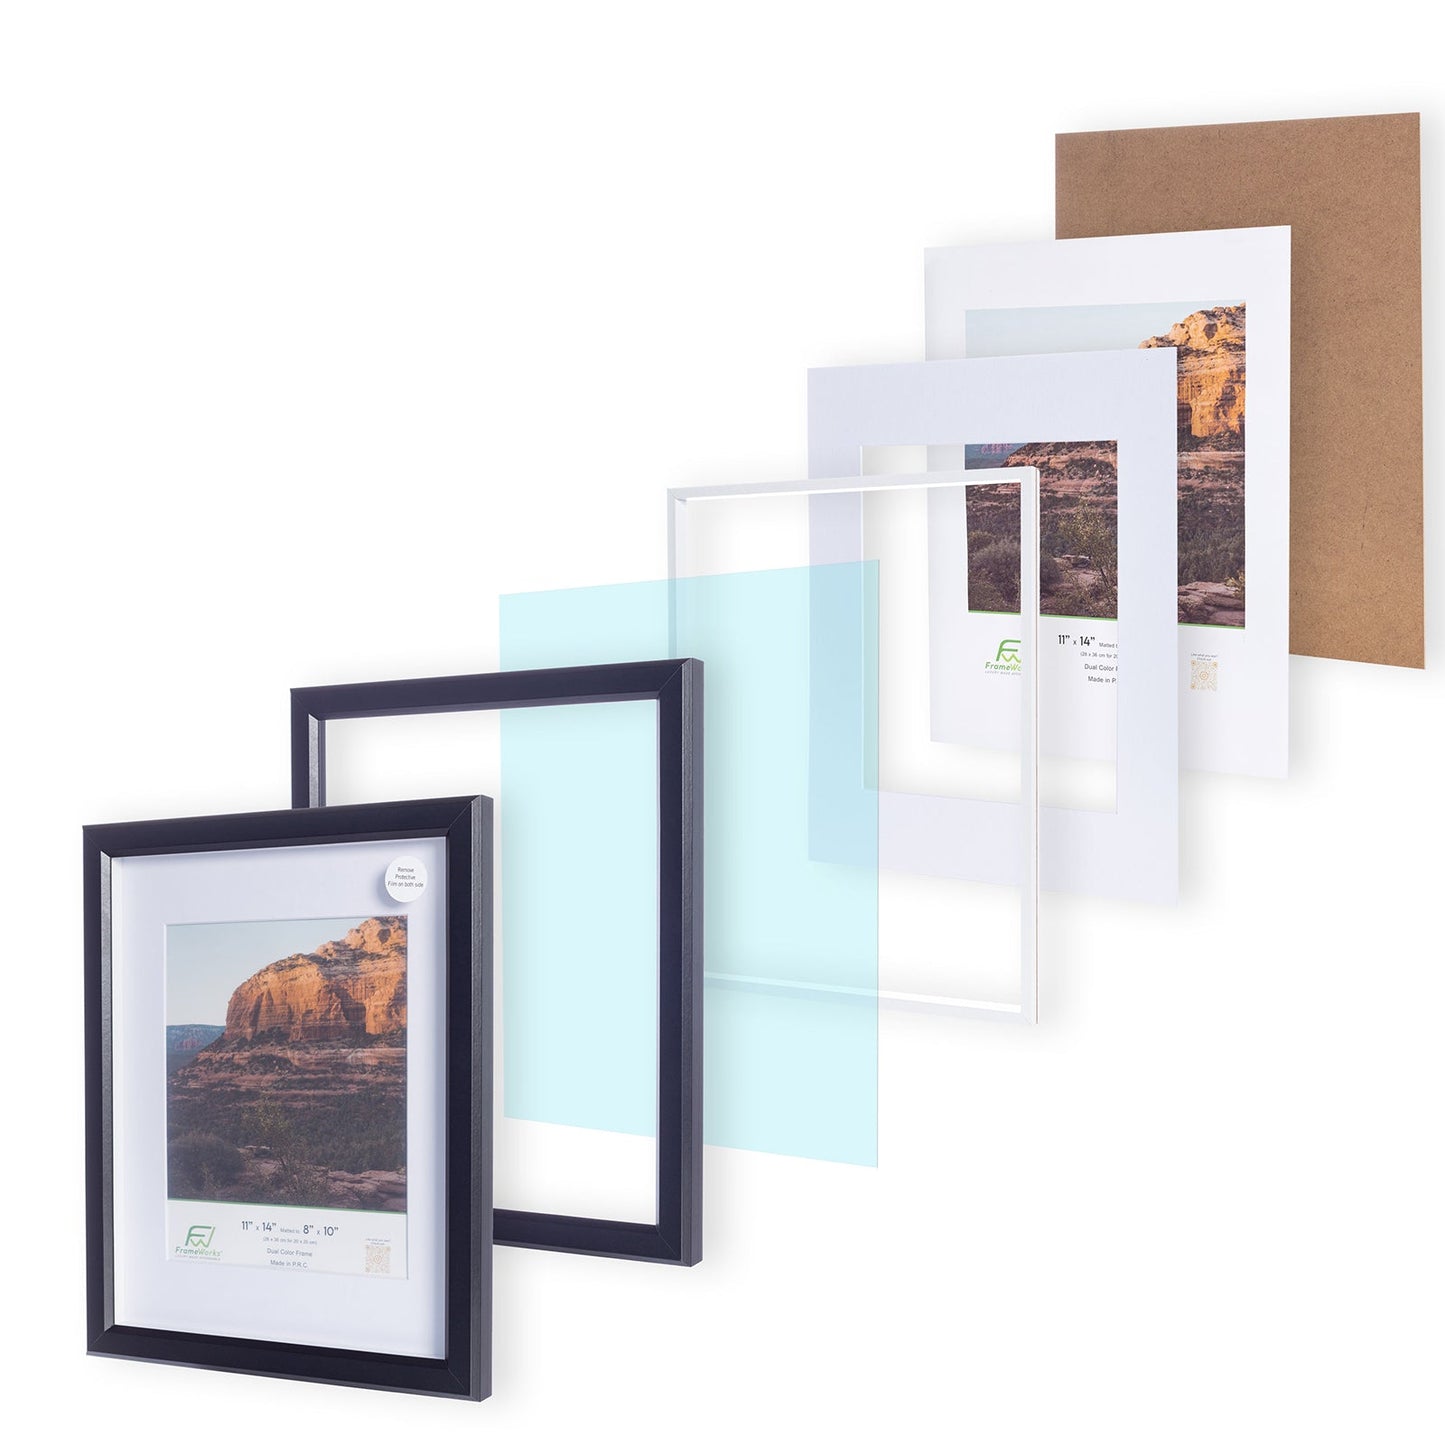 11" x 14" Black MDF Wood Multi-Pack Gunnabo Picture Frames, 8" x 10" Matted